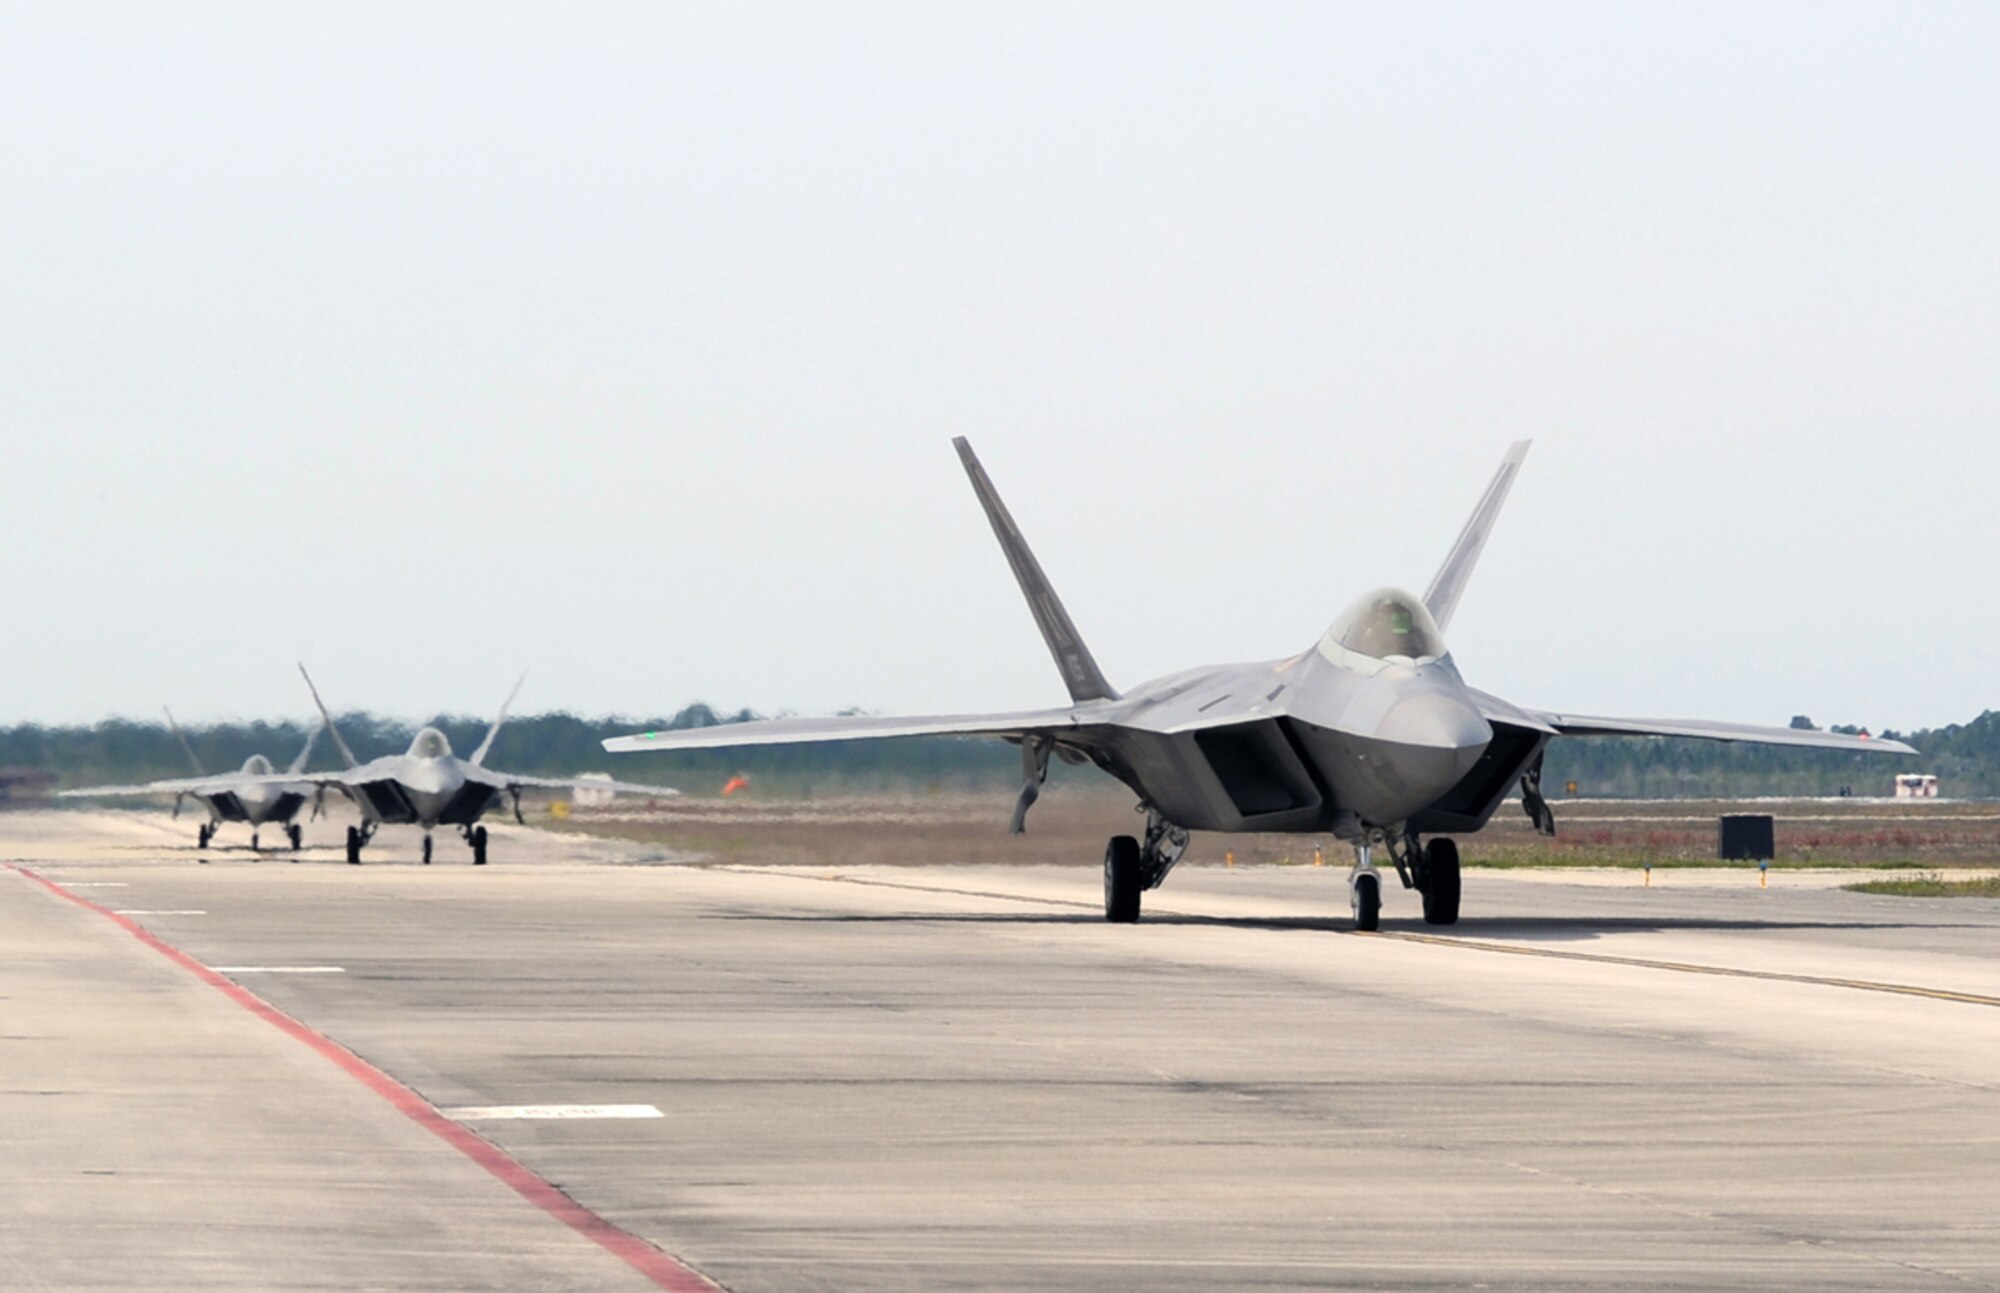 F-22s from the 90th Fighter Squadron at Joint Base Elmendorf-Richardson prepare for take-off on the flight line at Tyndall Air Force Base, Fla., during a Weapon Systems Evaluation Program March 26, 2014. The WSEP validates personnel, equipment and procedures. (U.S. Air Force photo/Master Sgt. Scott Wilcox)